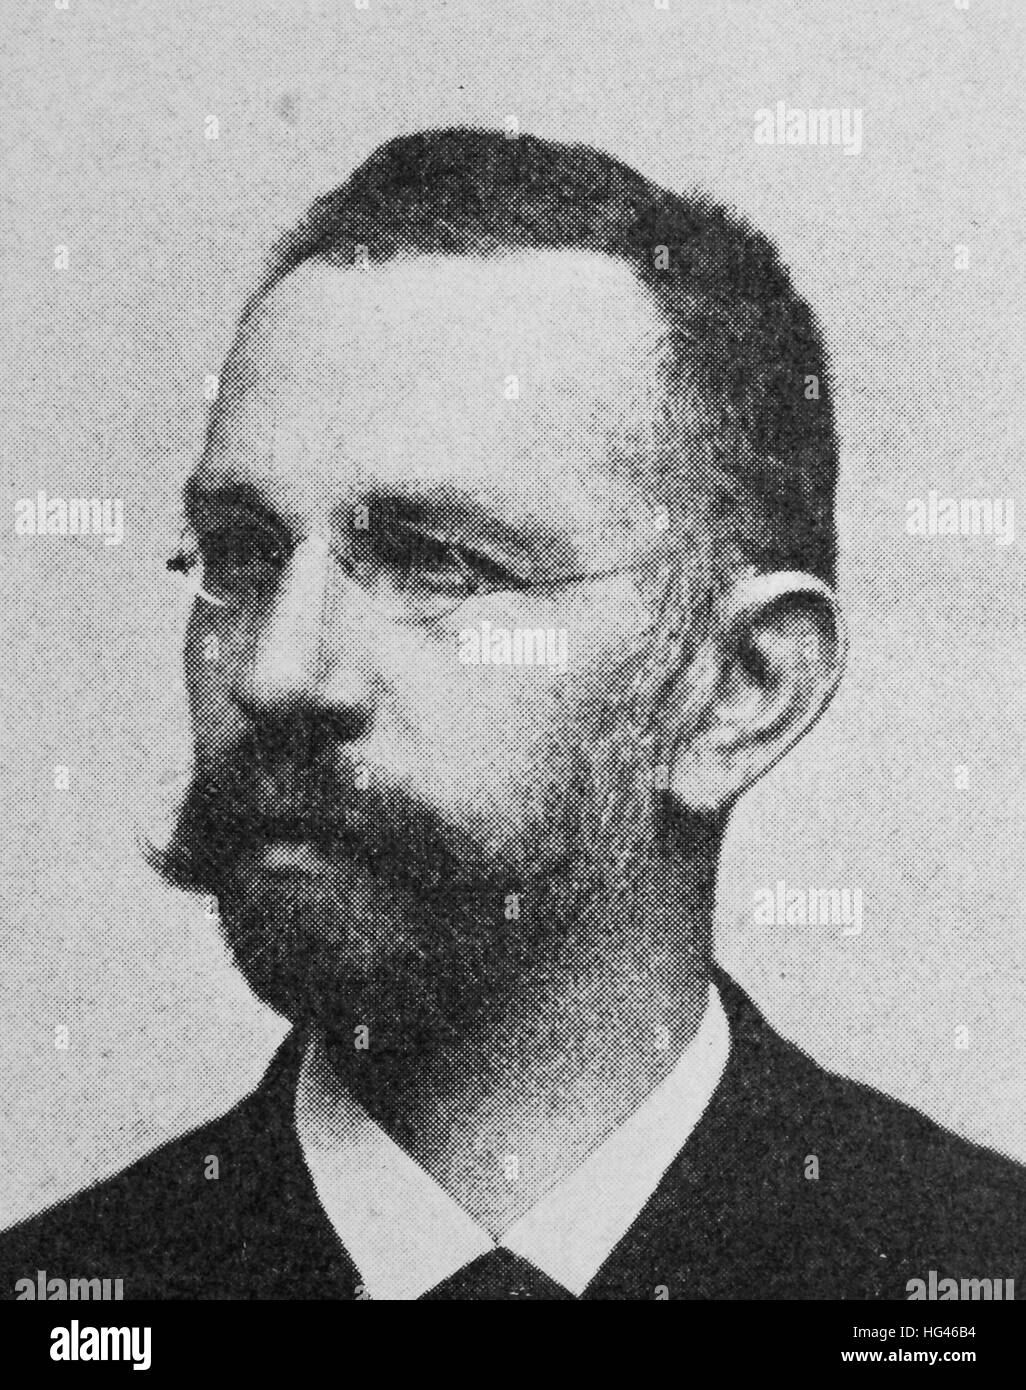 Carl von Bach, Born March 8, 1847; Died October 10, 1931; Full name Julius Carl von Bach, was a German mechanical engineer and university lecturer., reproduction of a photo from the year 1895, digital improved Stock Photo